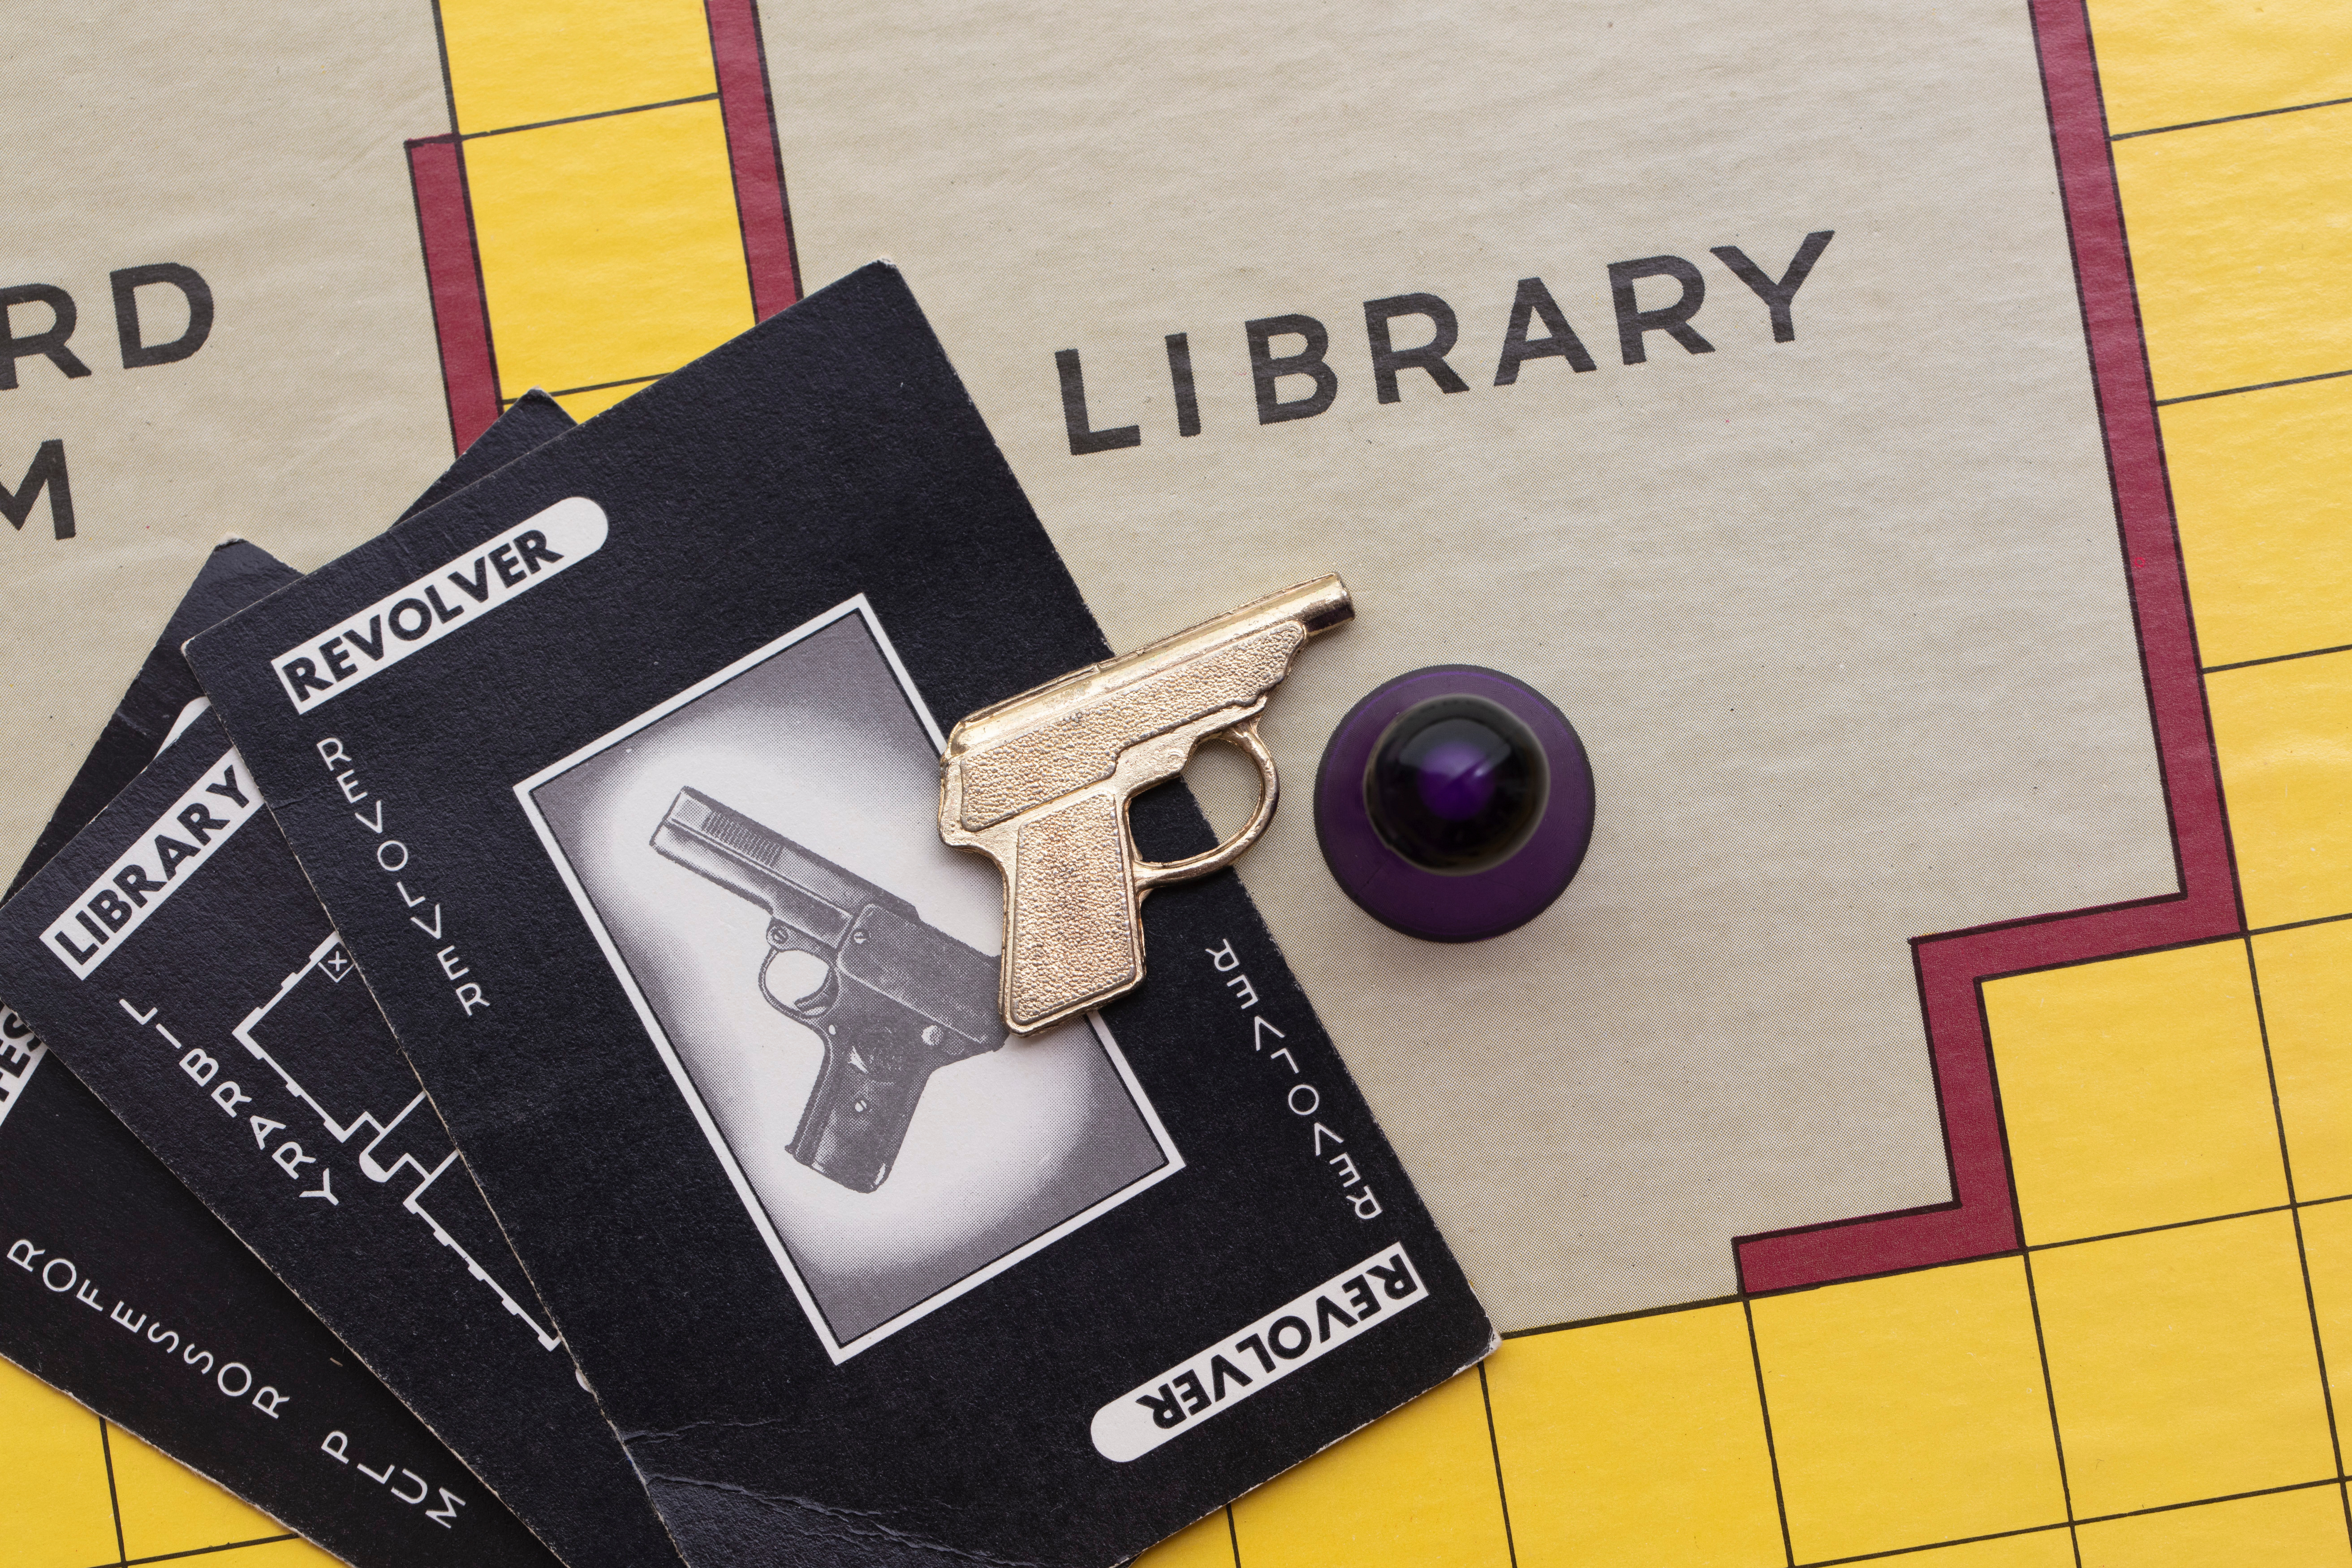 Part of a Cluedo board with a counter, mini revolver and Cluedo cards